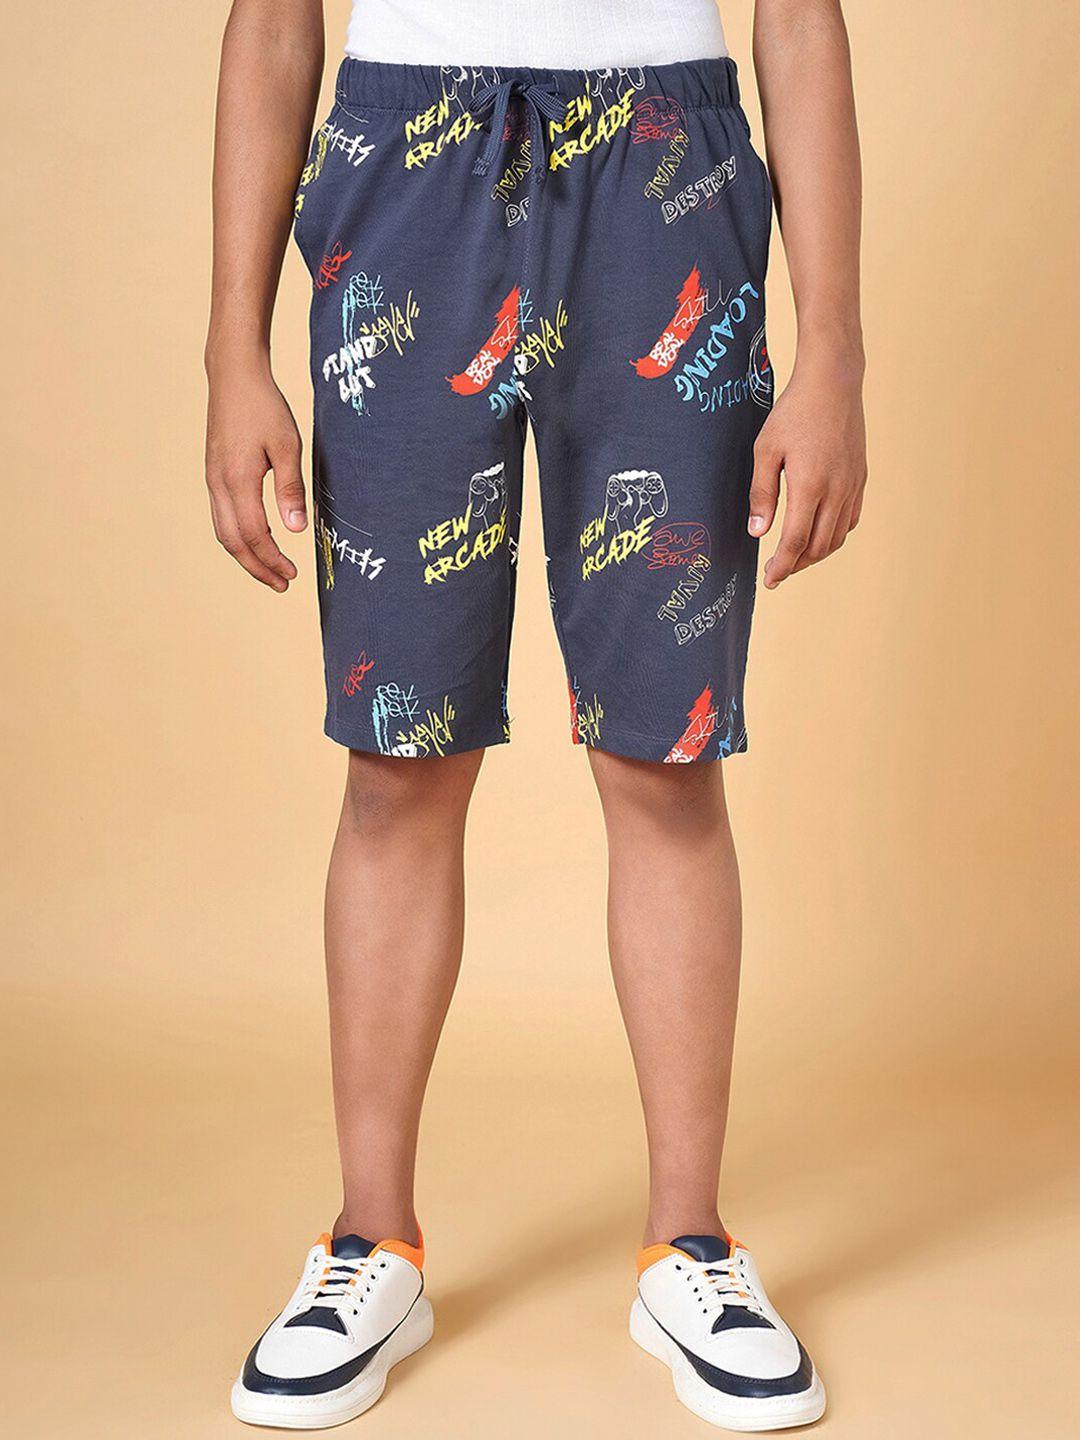 coolsters by pantaloons boys typography printed mid-rise cotton shorts